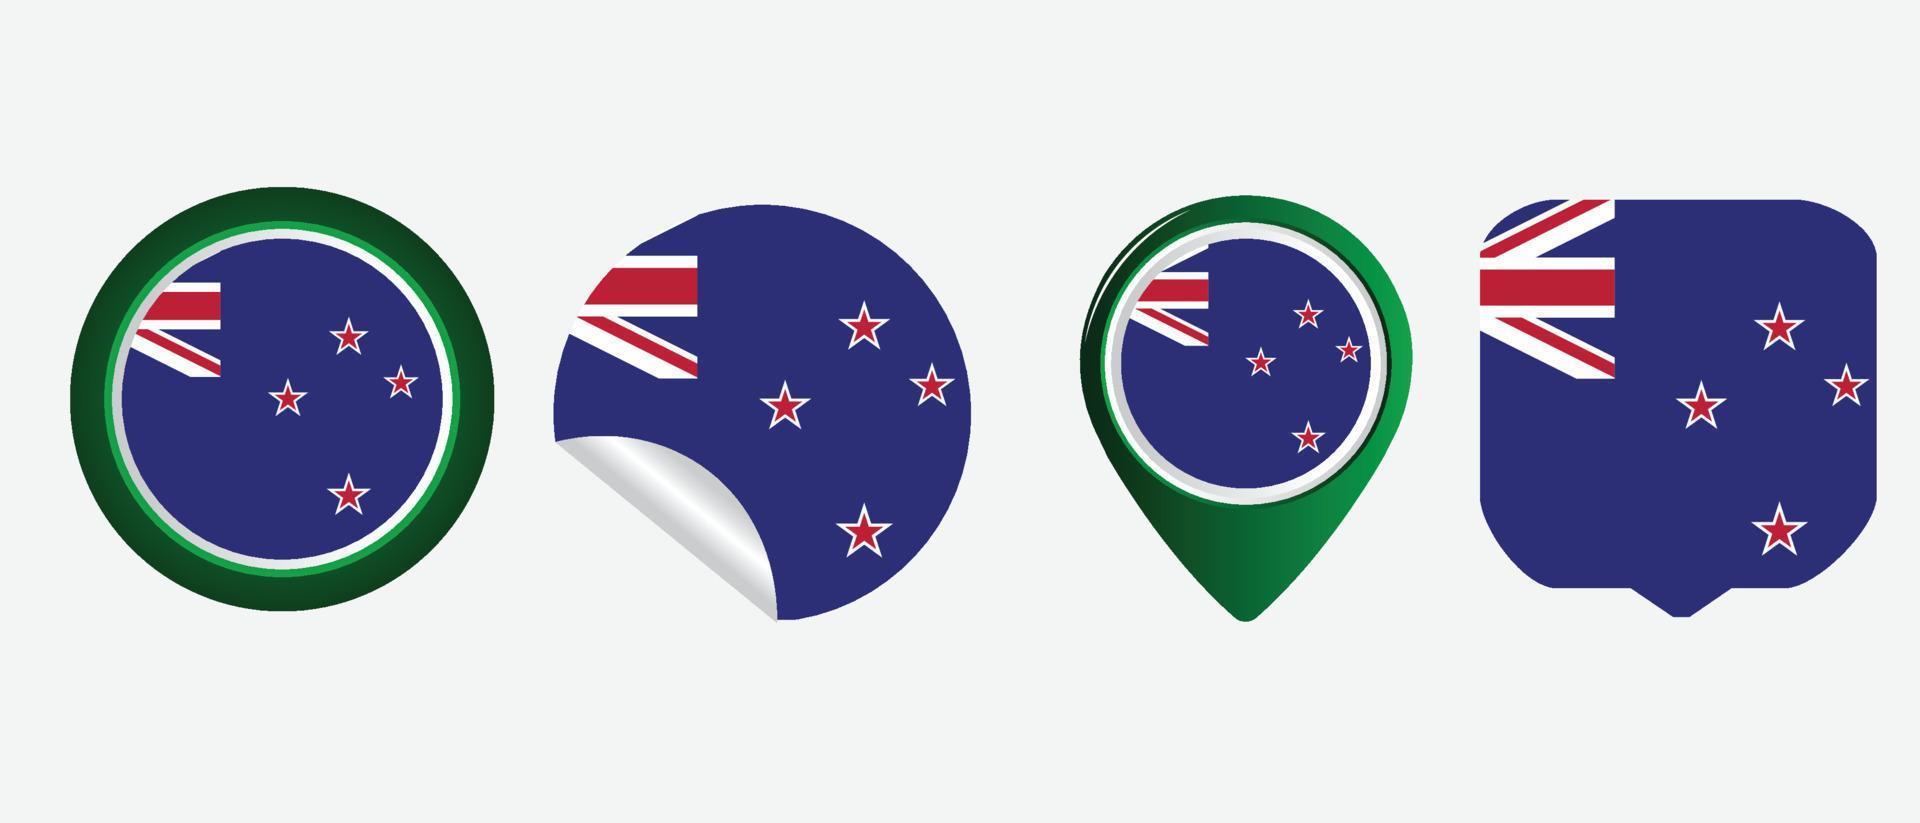 New Zealand flag icon . web icon set . icons collection flat. Simple vector illustration.